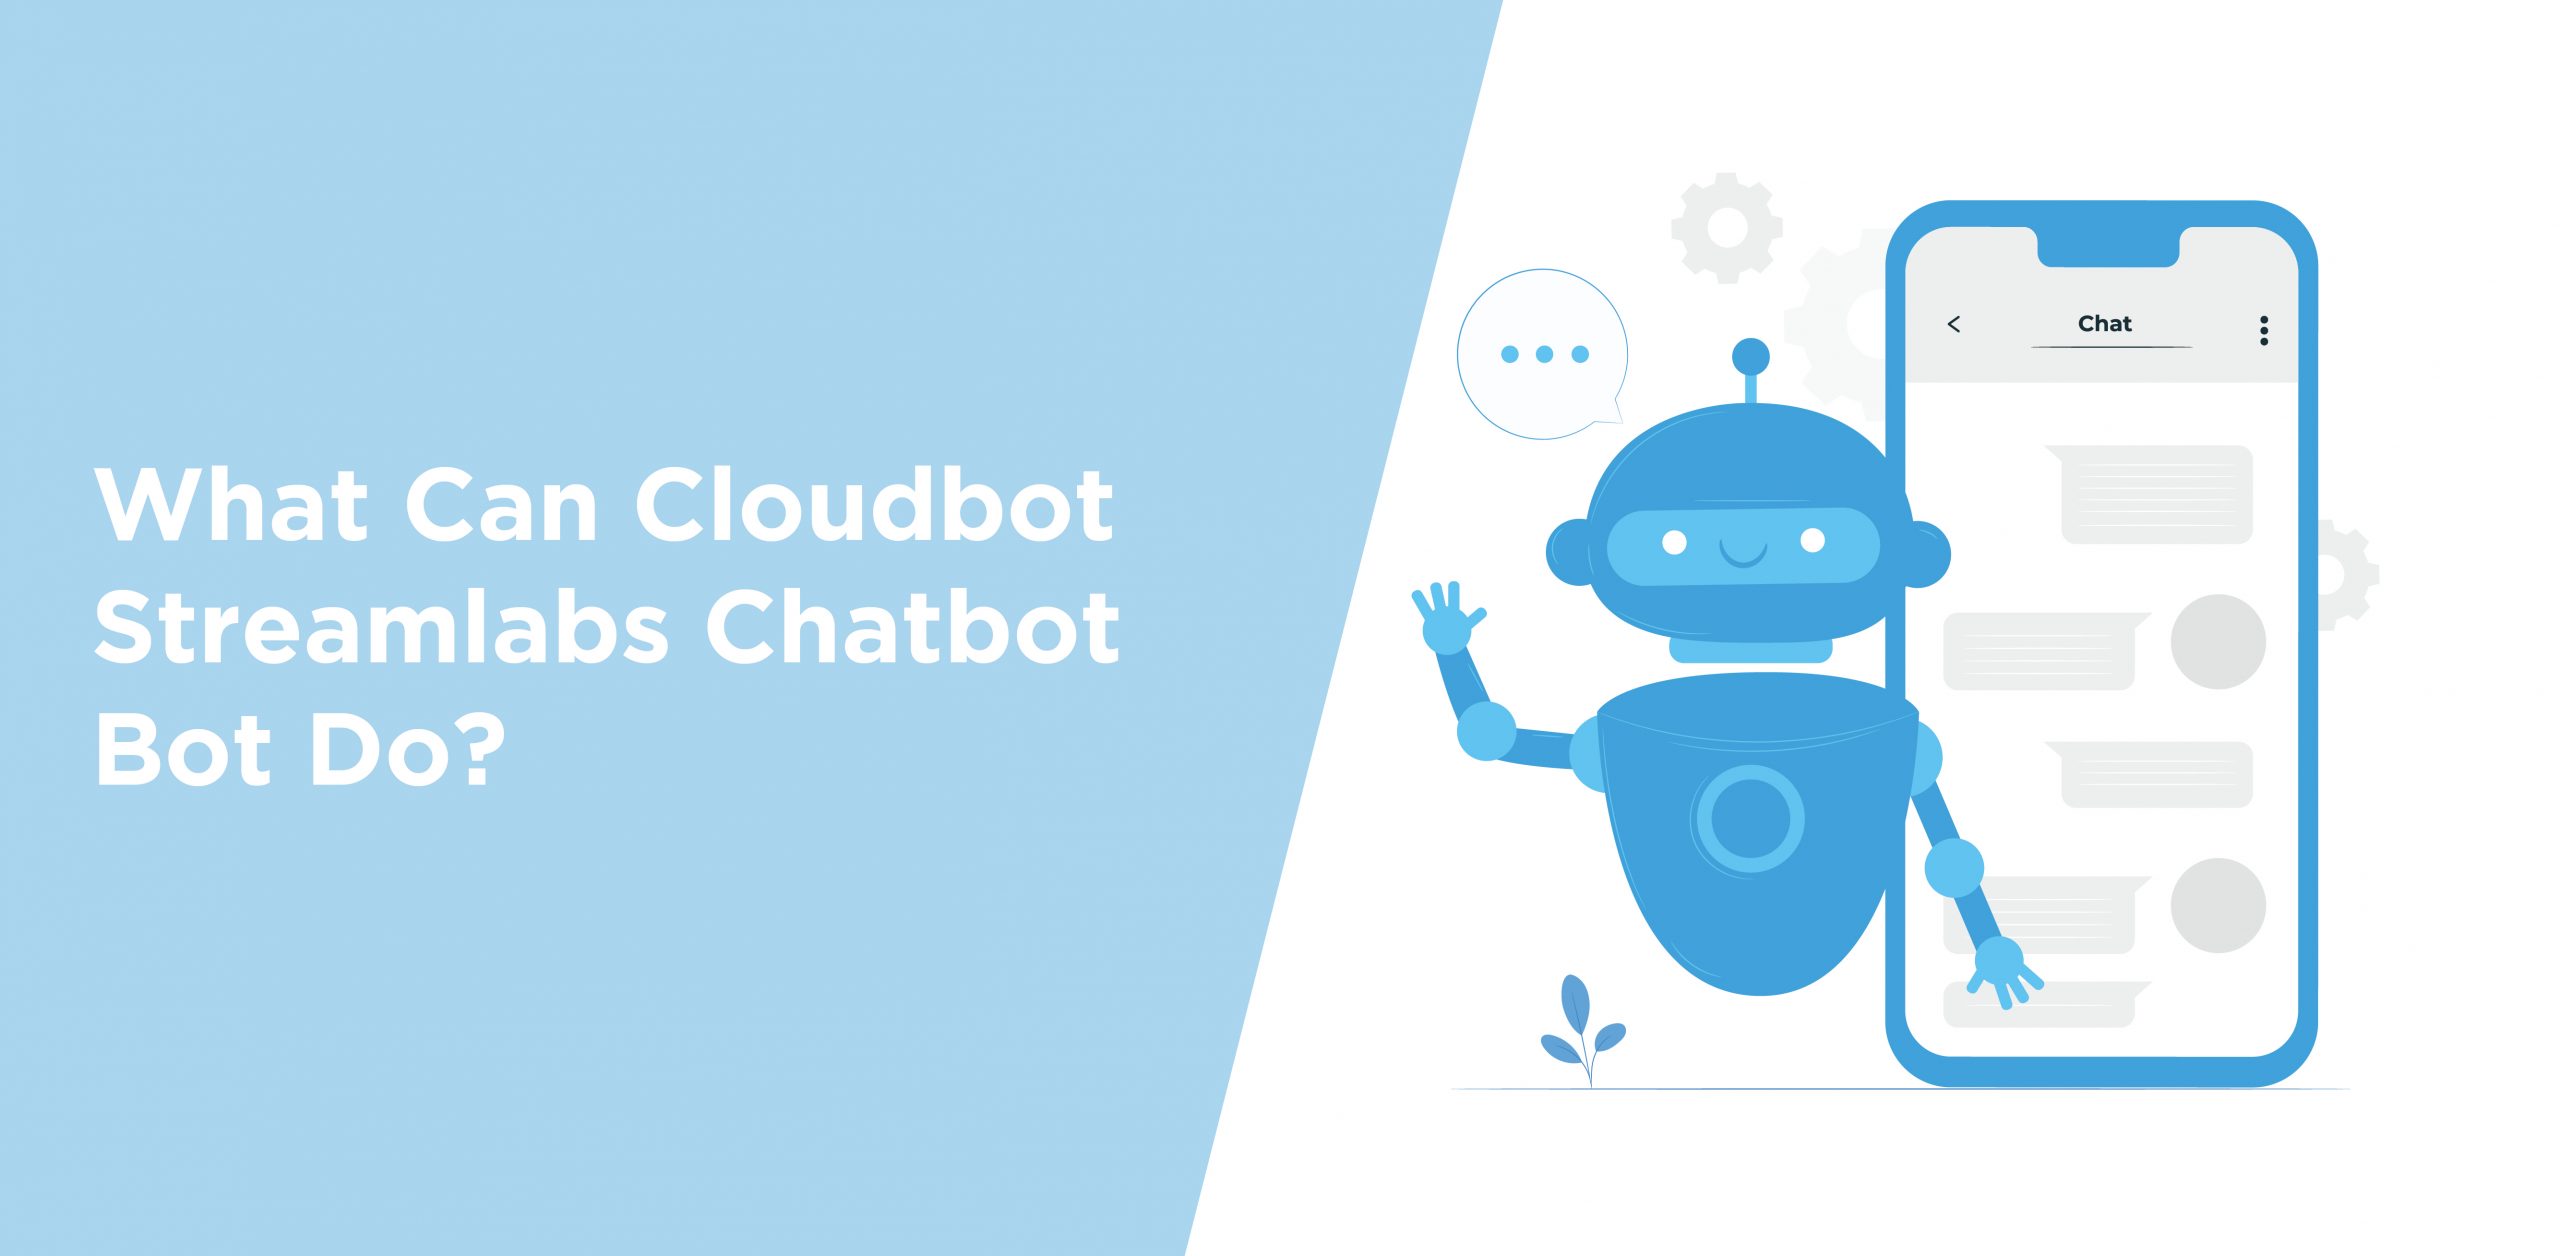 What Can Cloudbot Streamlabs Chatbot Bot Do?